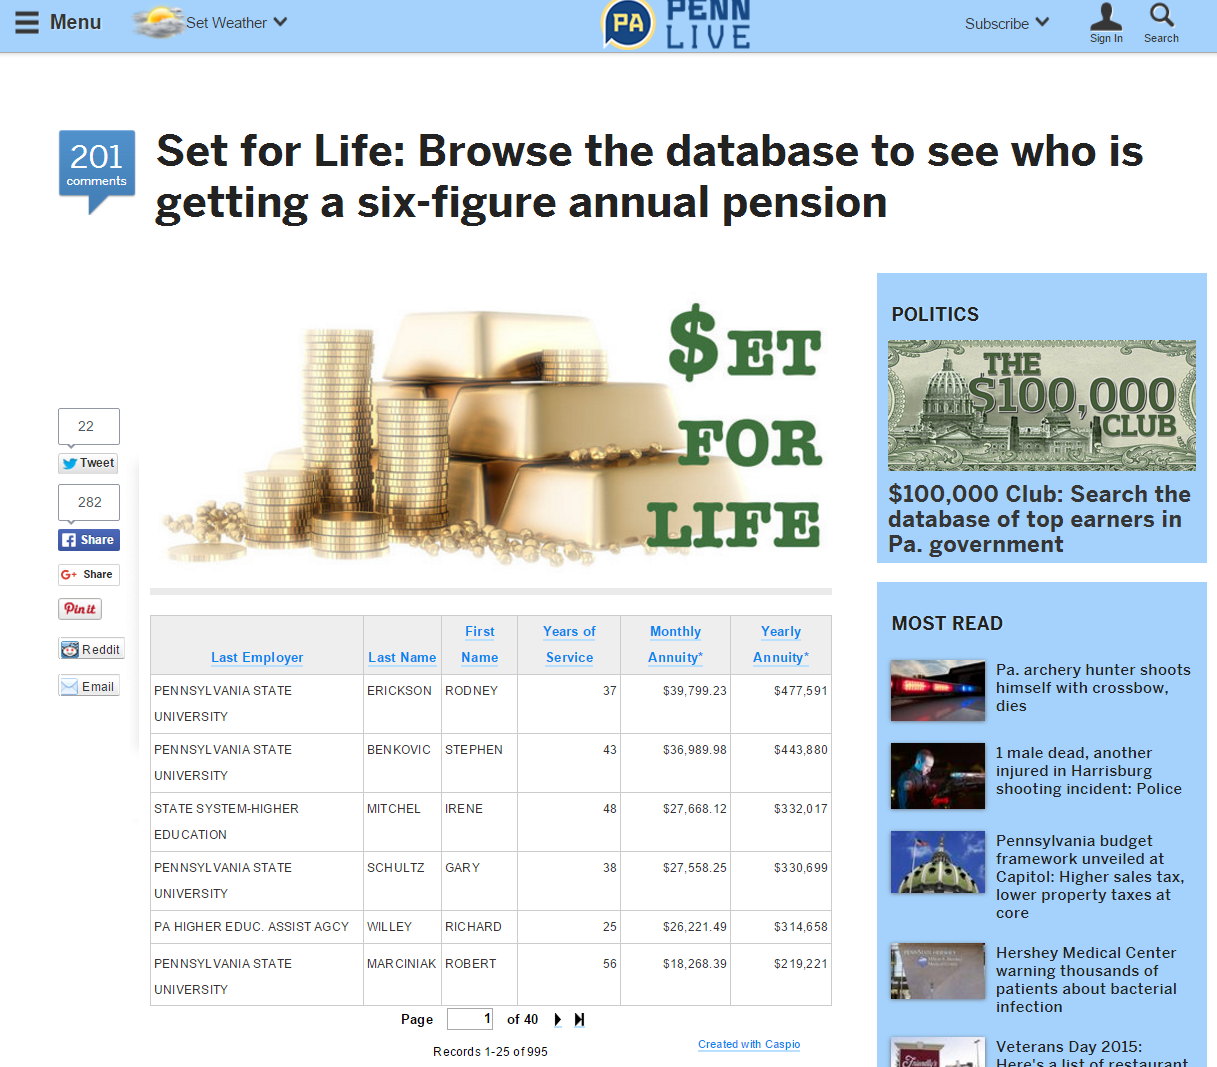 Data journalism: Pension database from pennlive.com